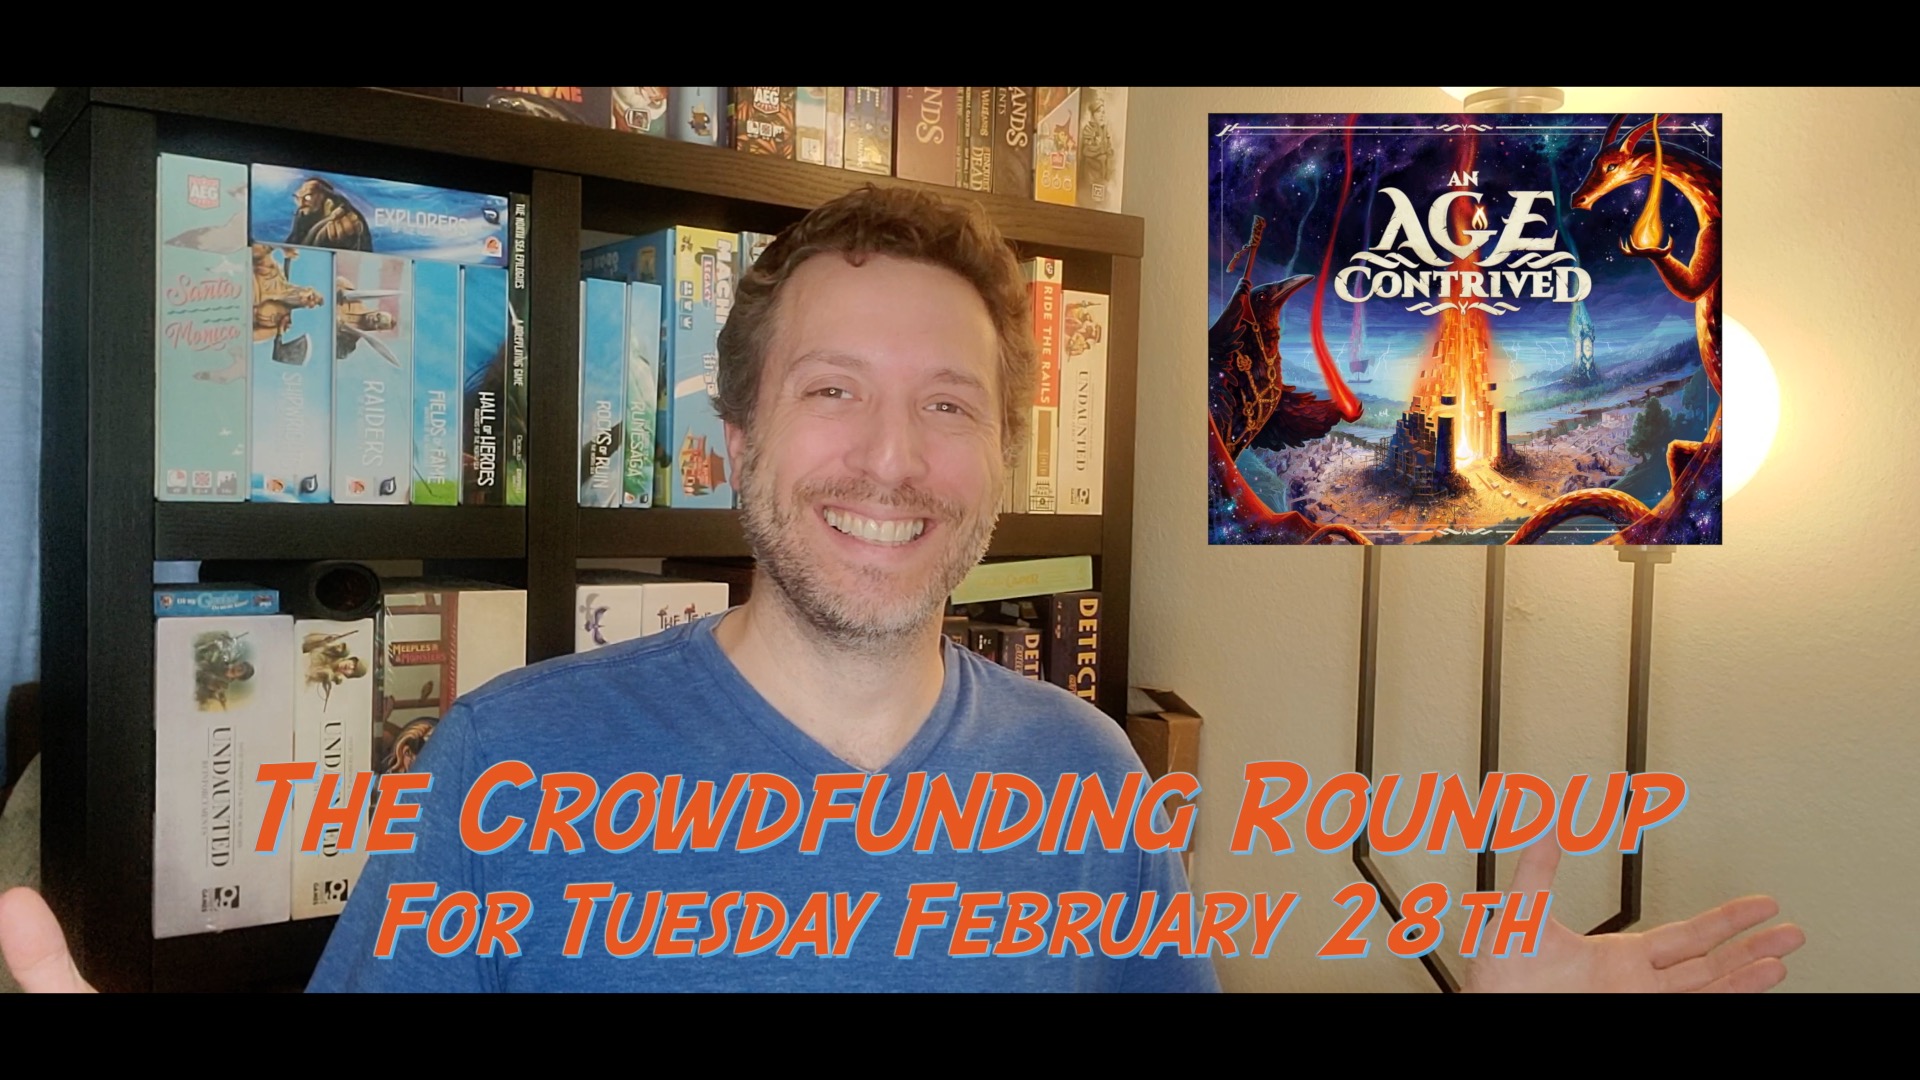 The Crowdfunding Roundup for Tuesday, February 28th